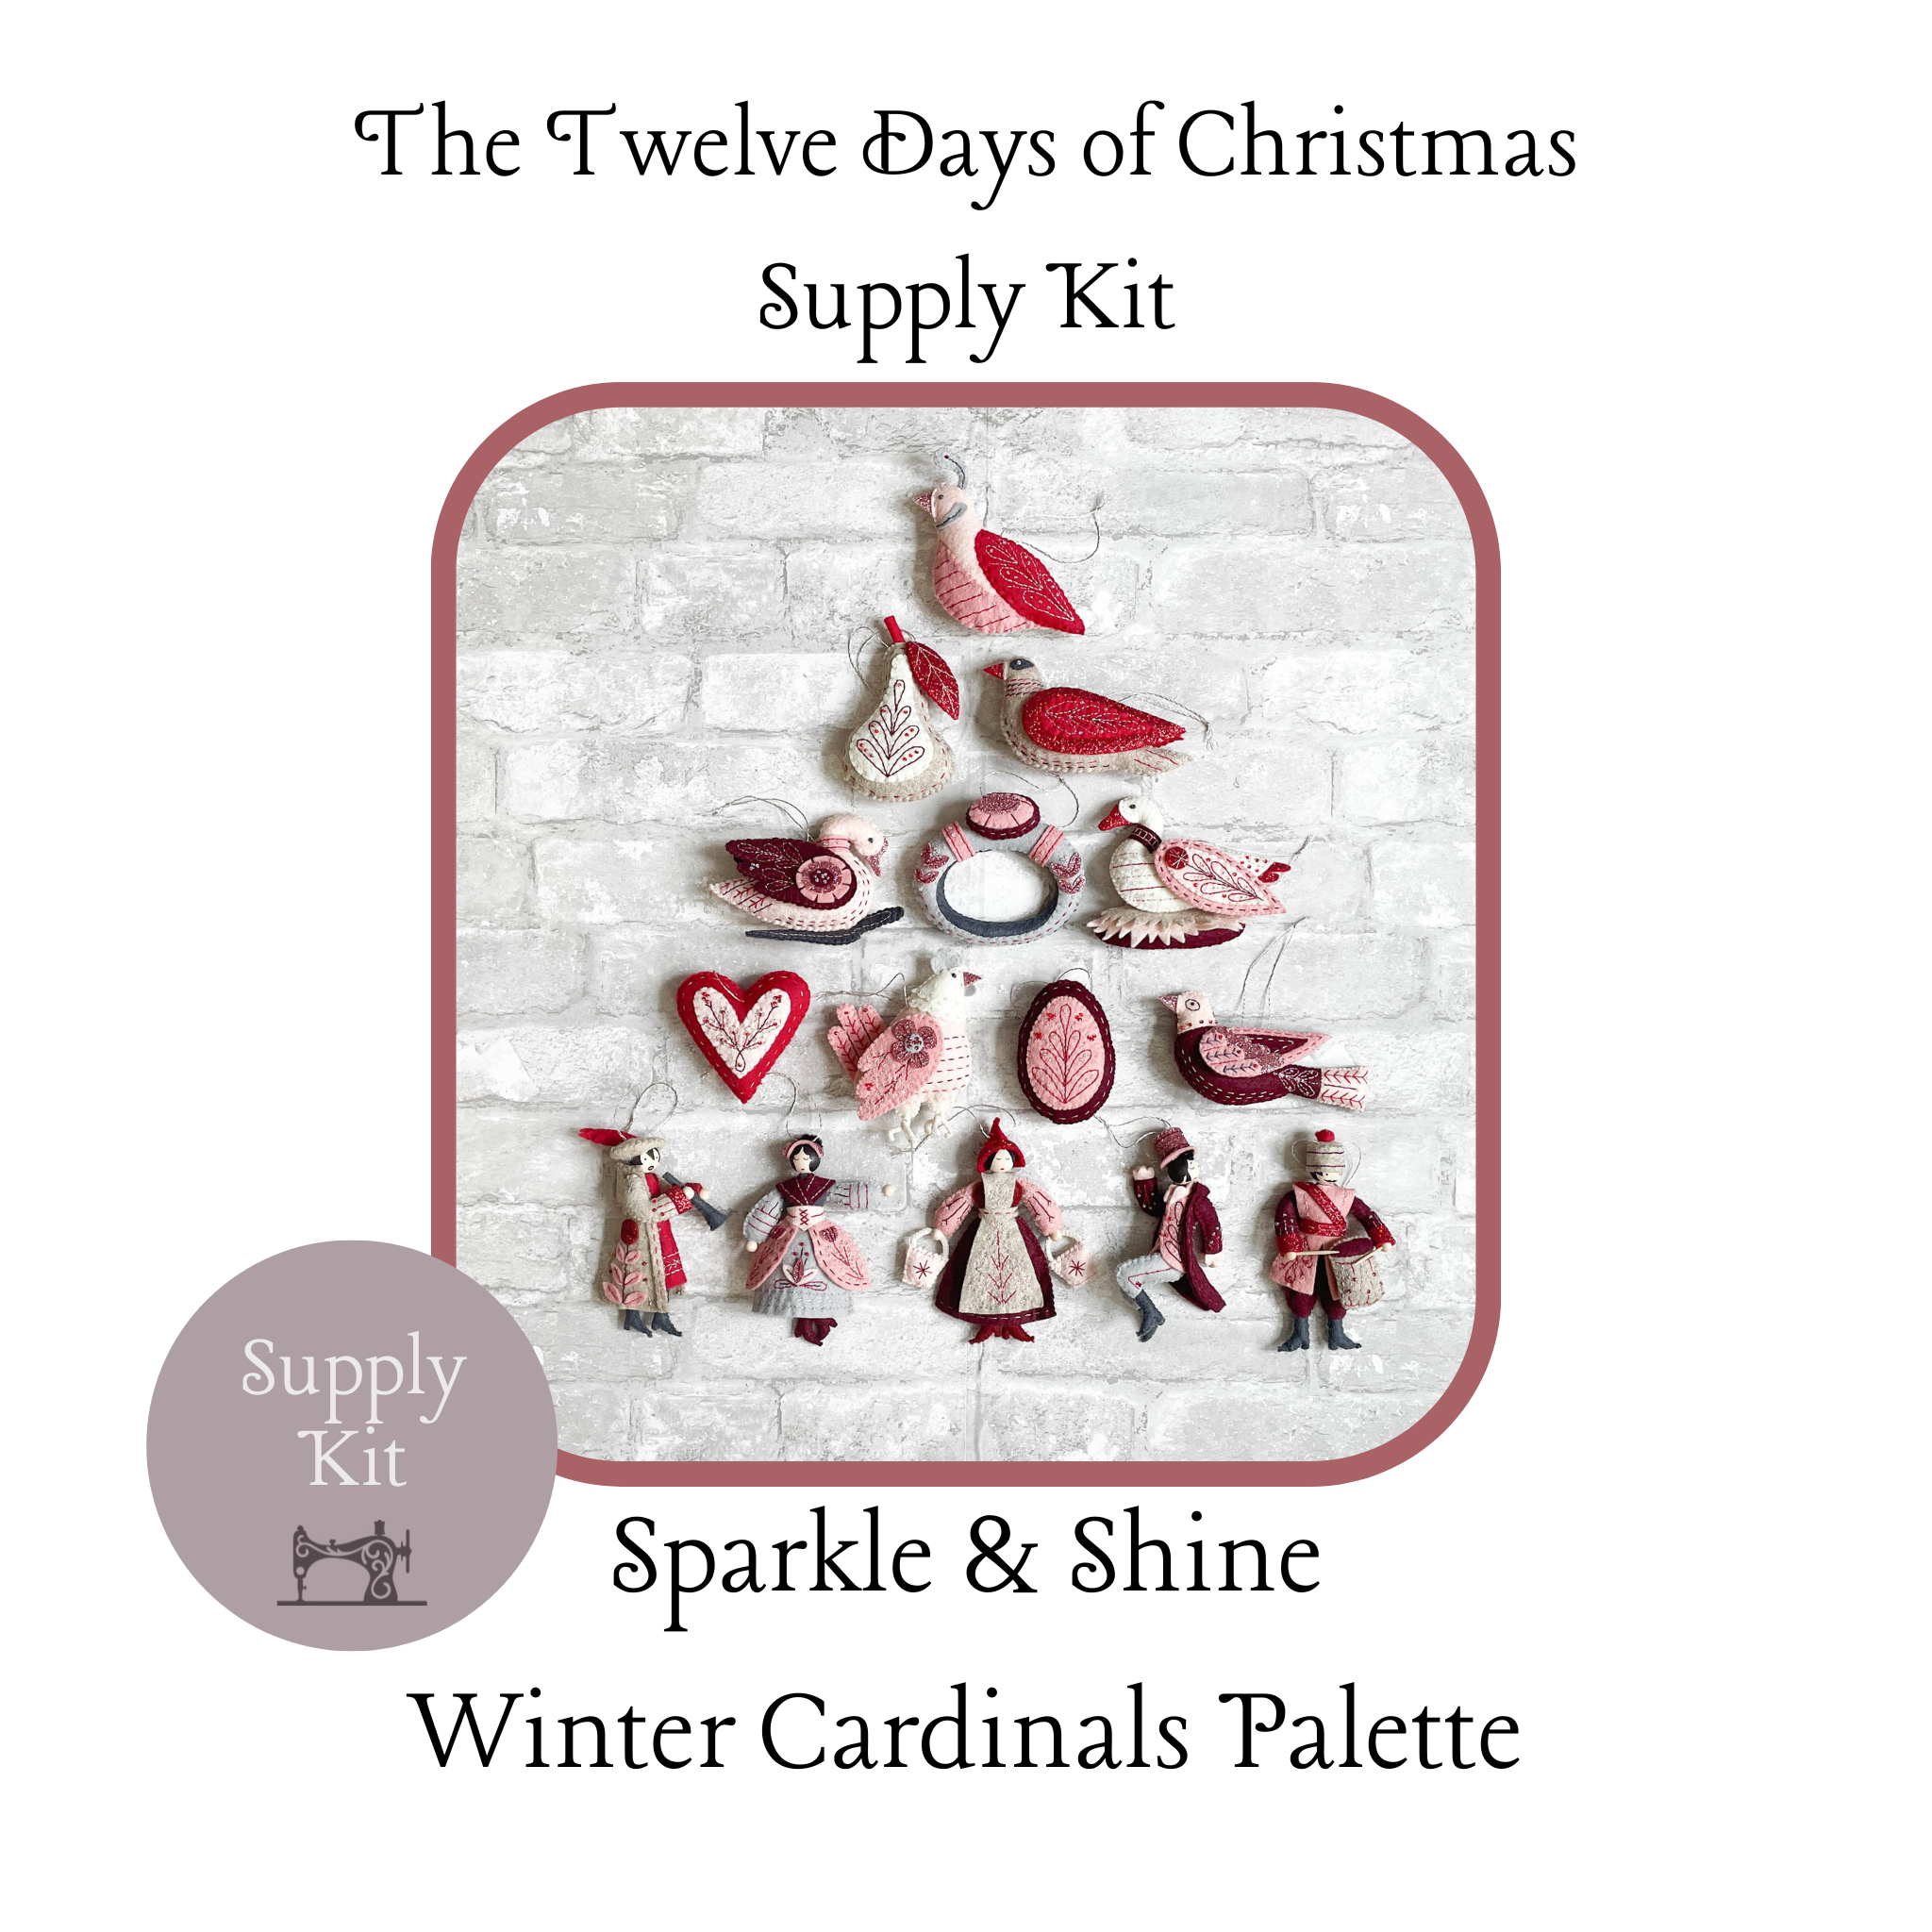 Sparkle &amp; Shine Winter Cardinals Palette for the Twelve Days of Christmas Series